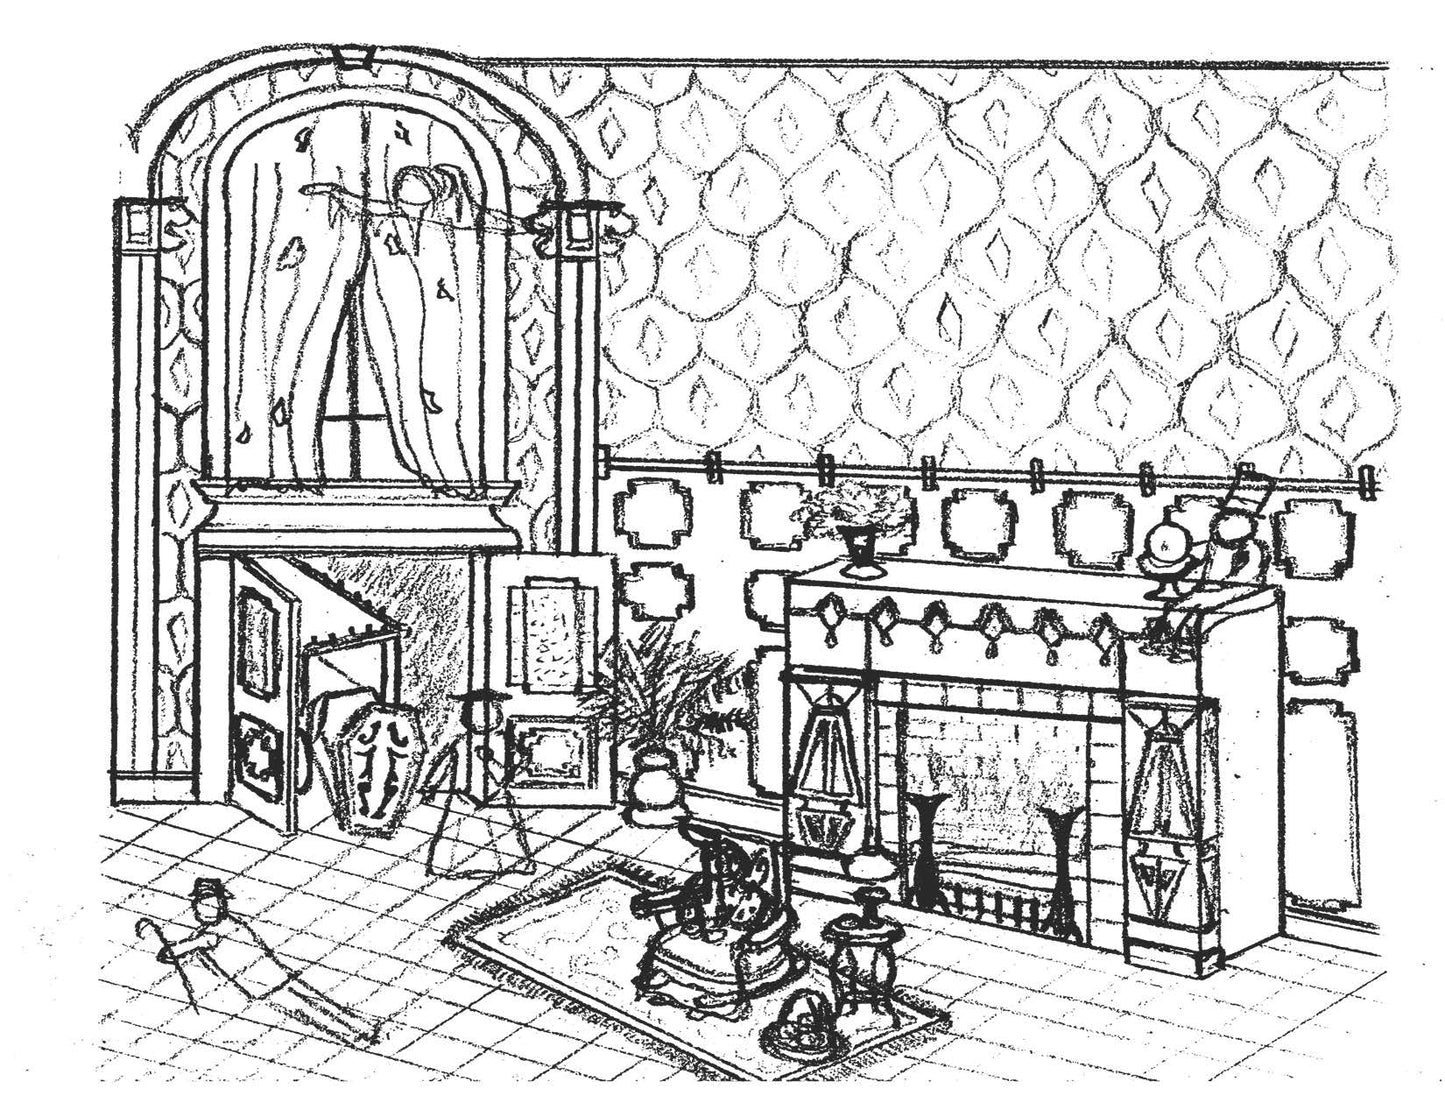 "Haunted Mansion" Tiny Coloring Book Digital Download by Jaime Tiny Themepark Art